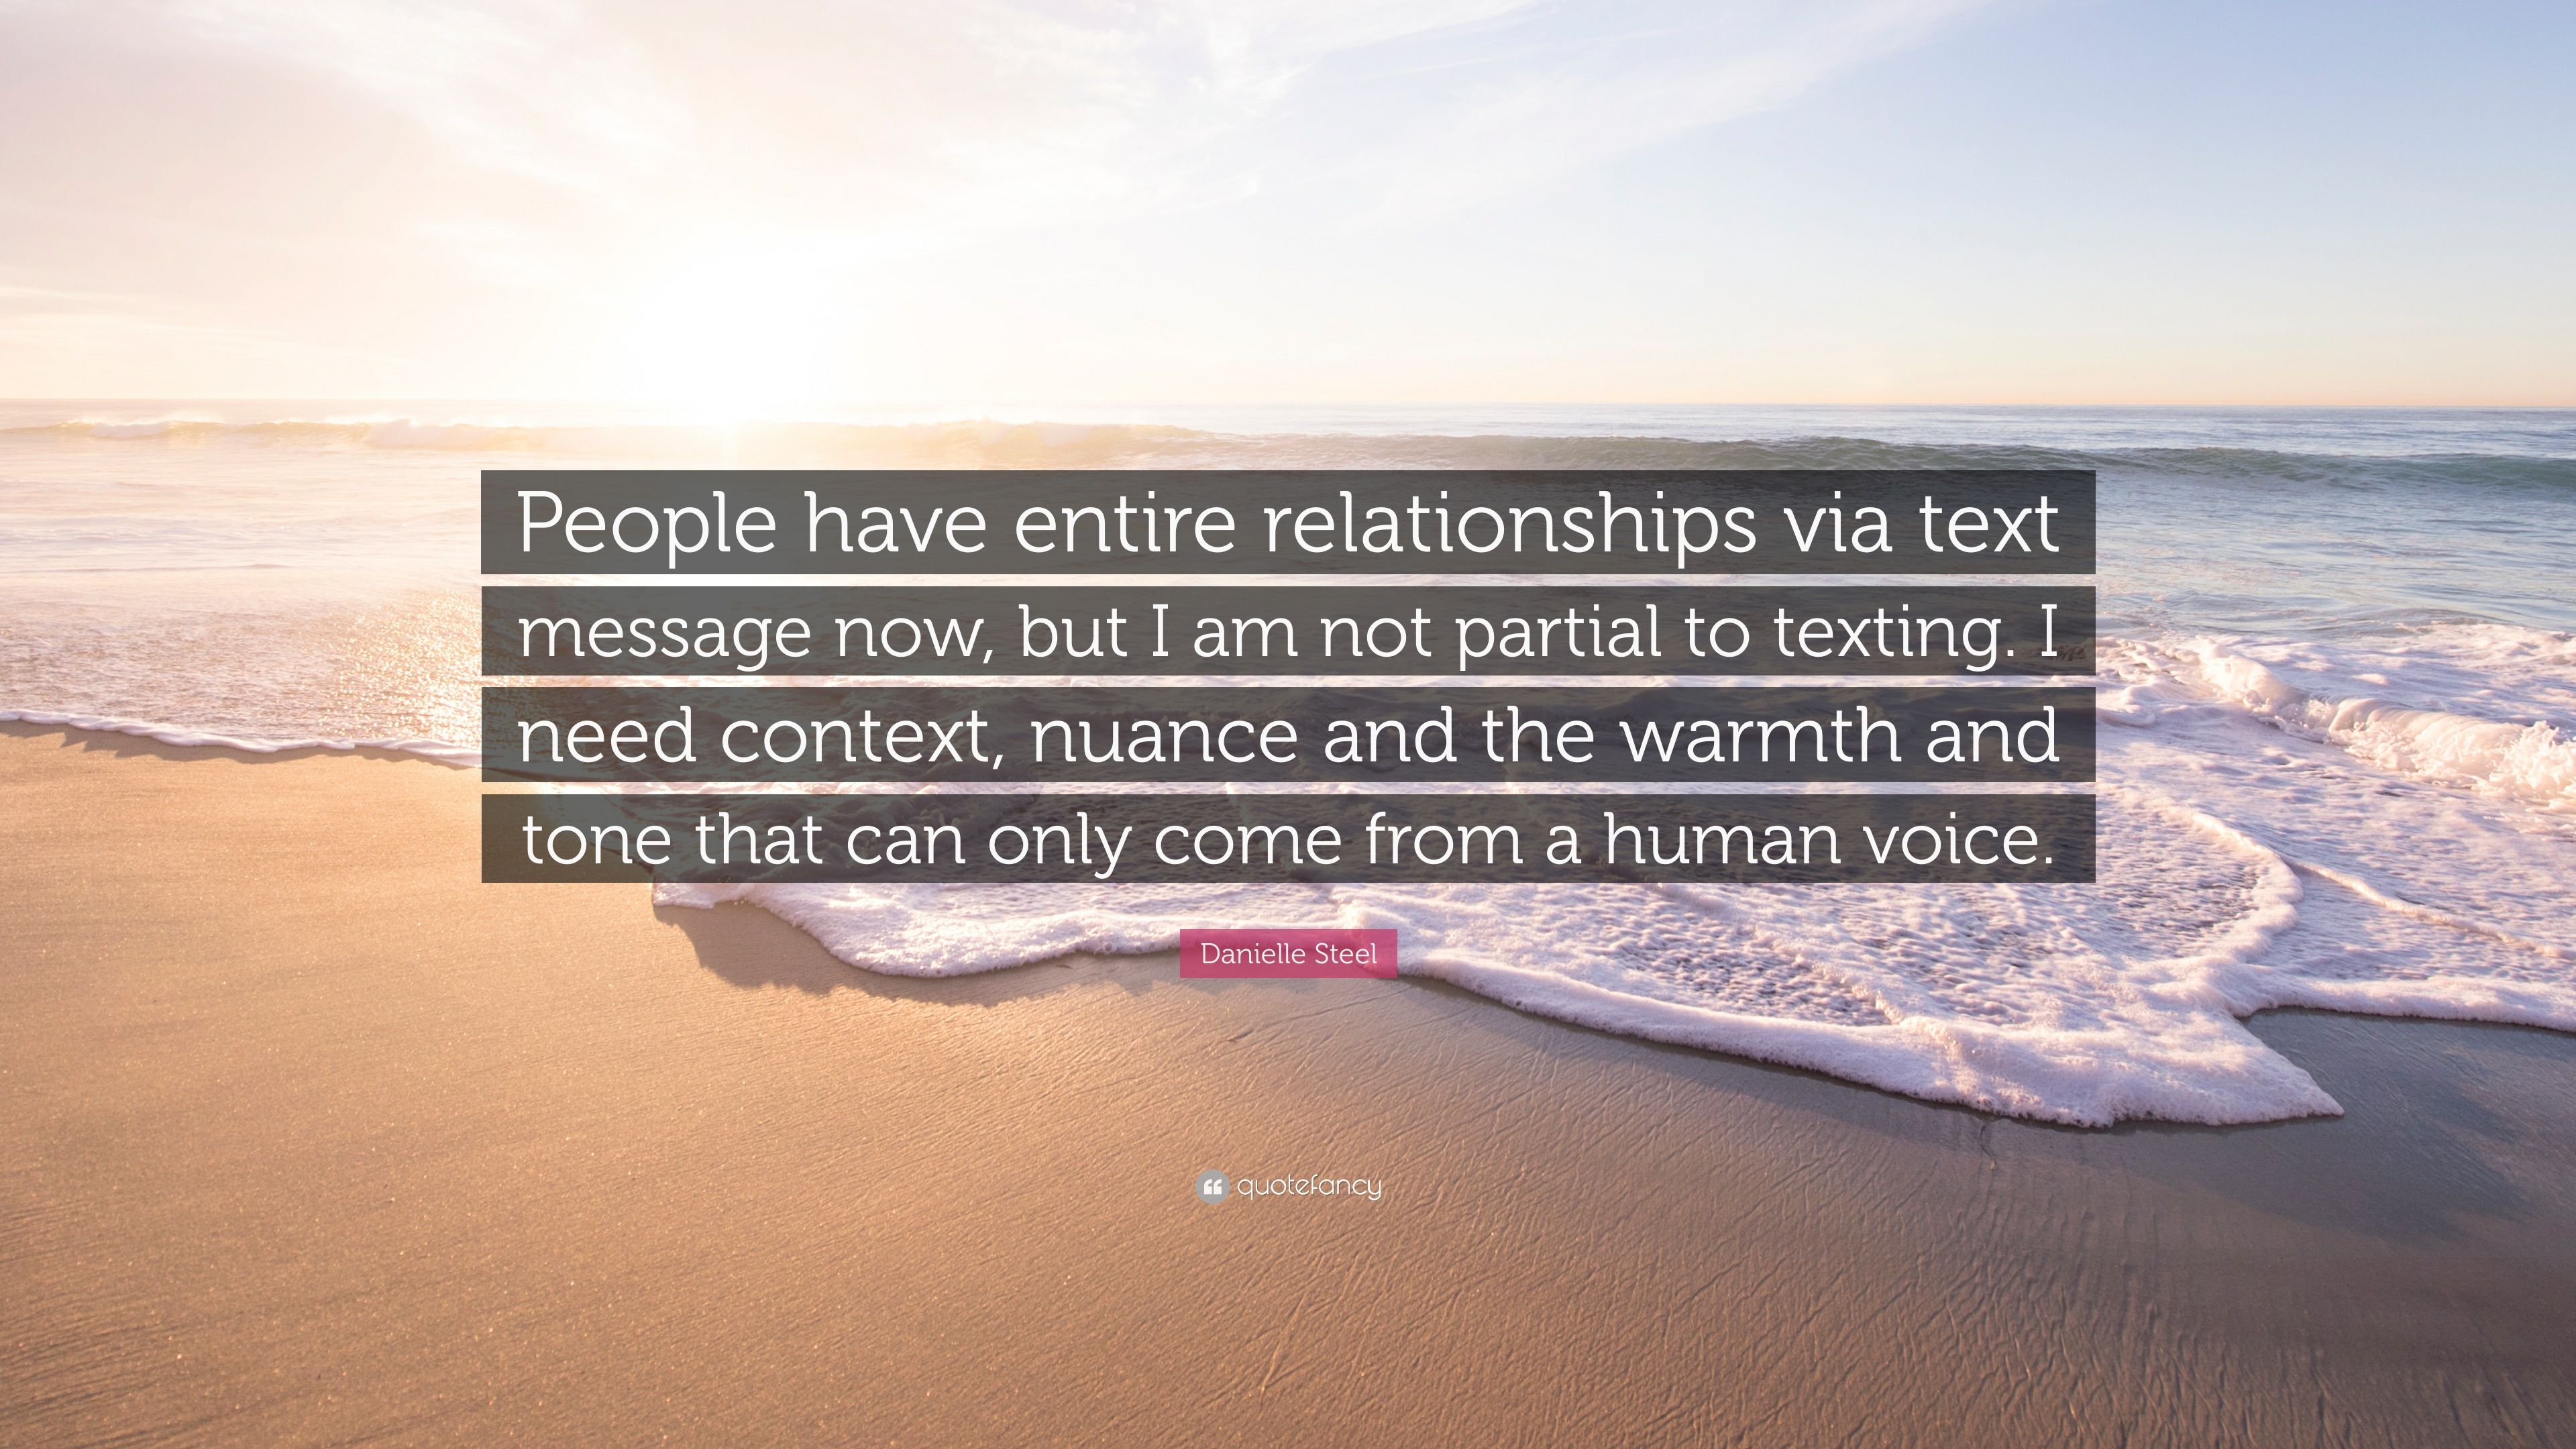 Danielle Steel Quote: “People have entire relationships via text